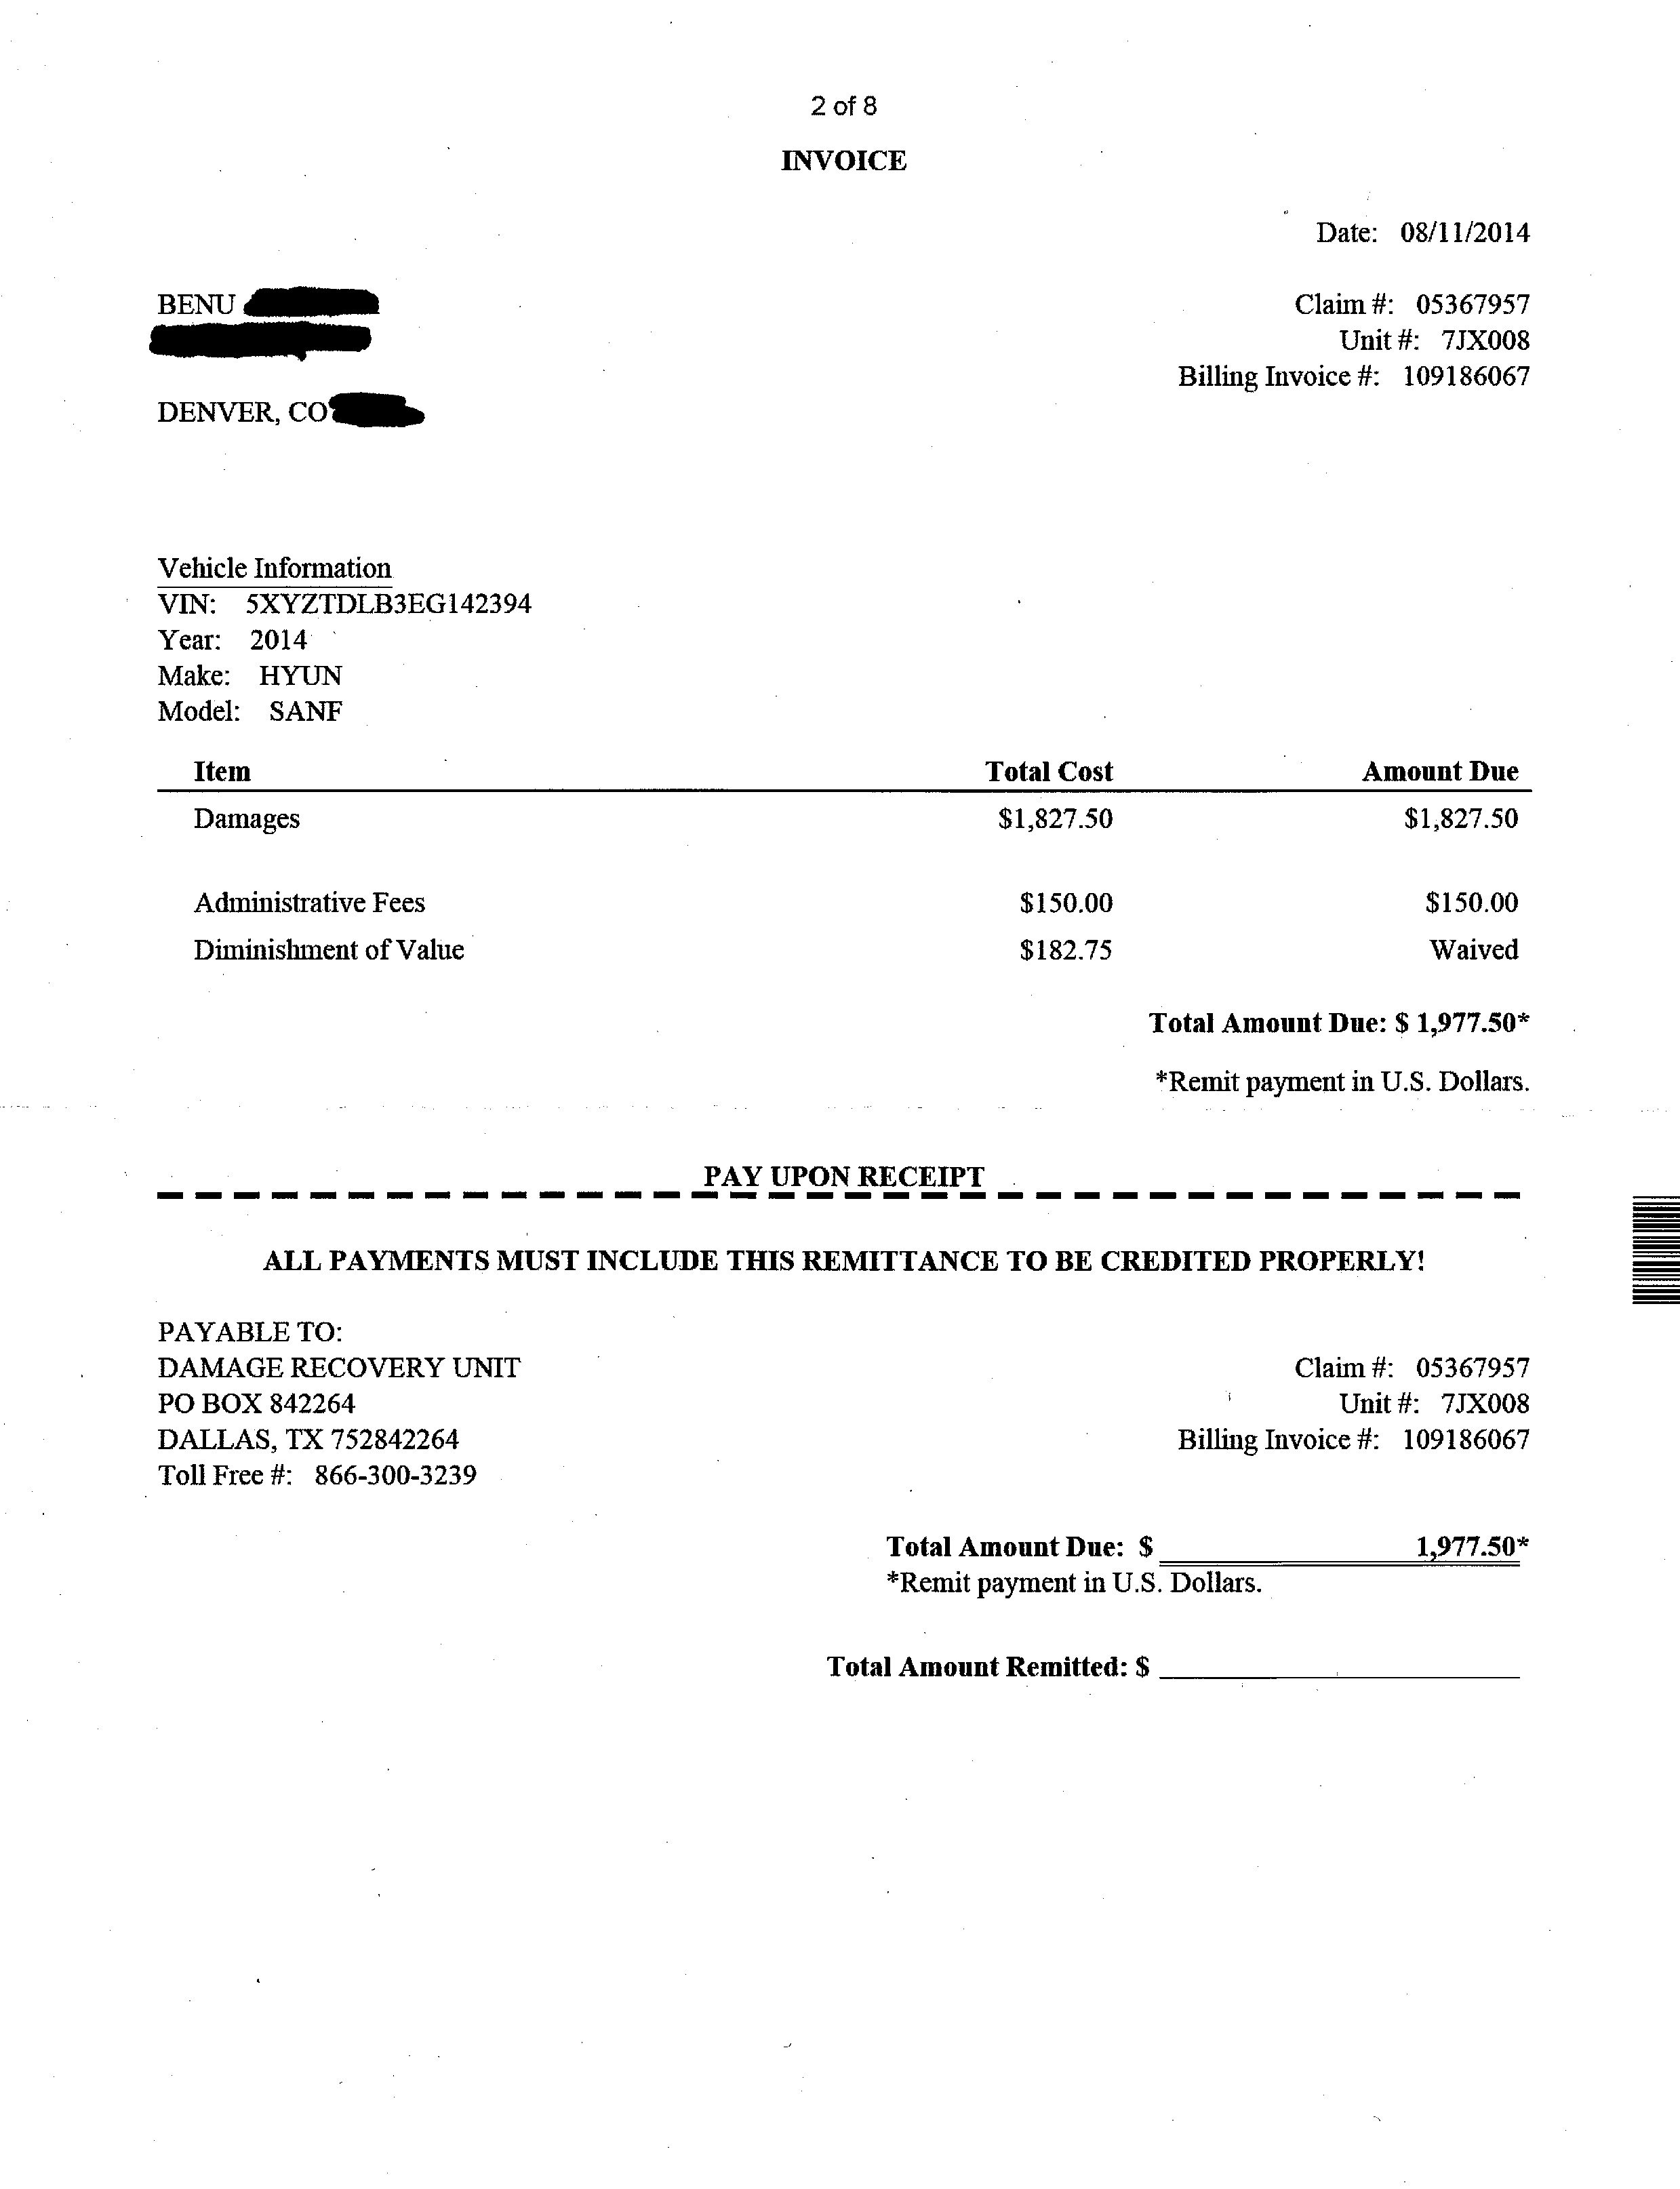 The invoice showing the total of $1977.50 (more than what the agent quoted me $1800).